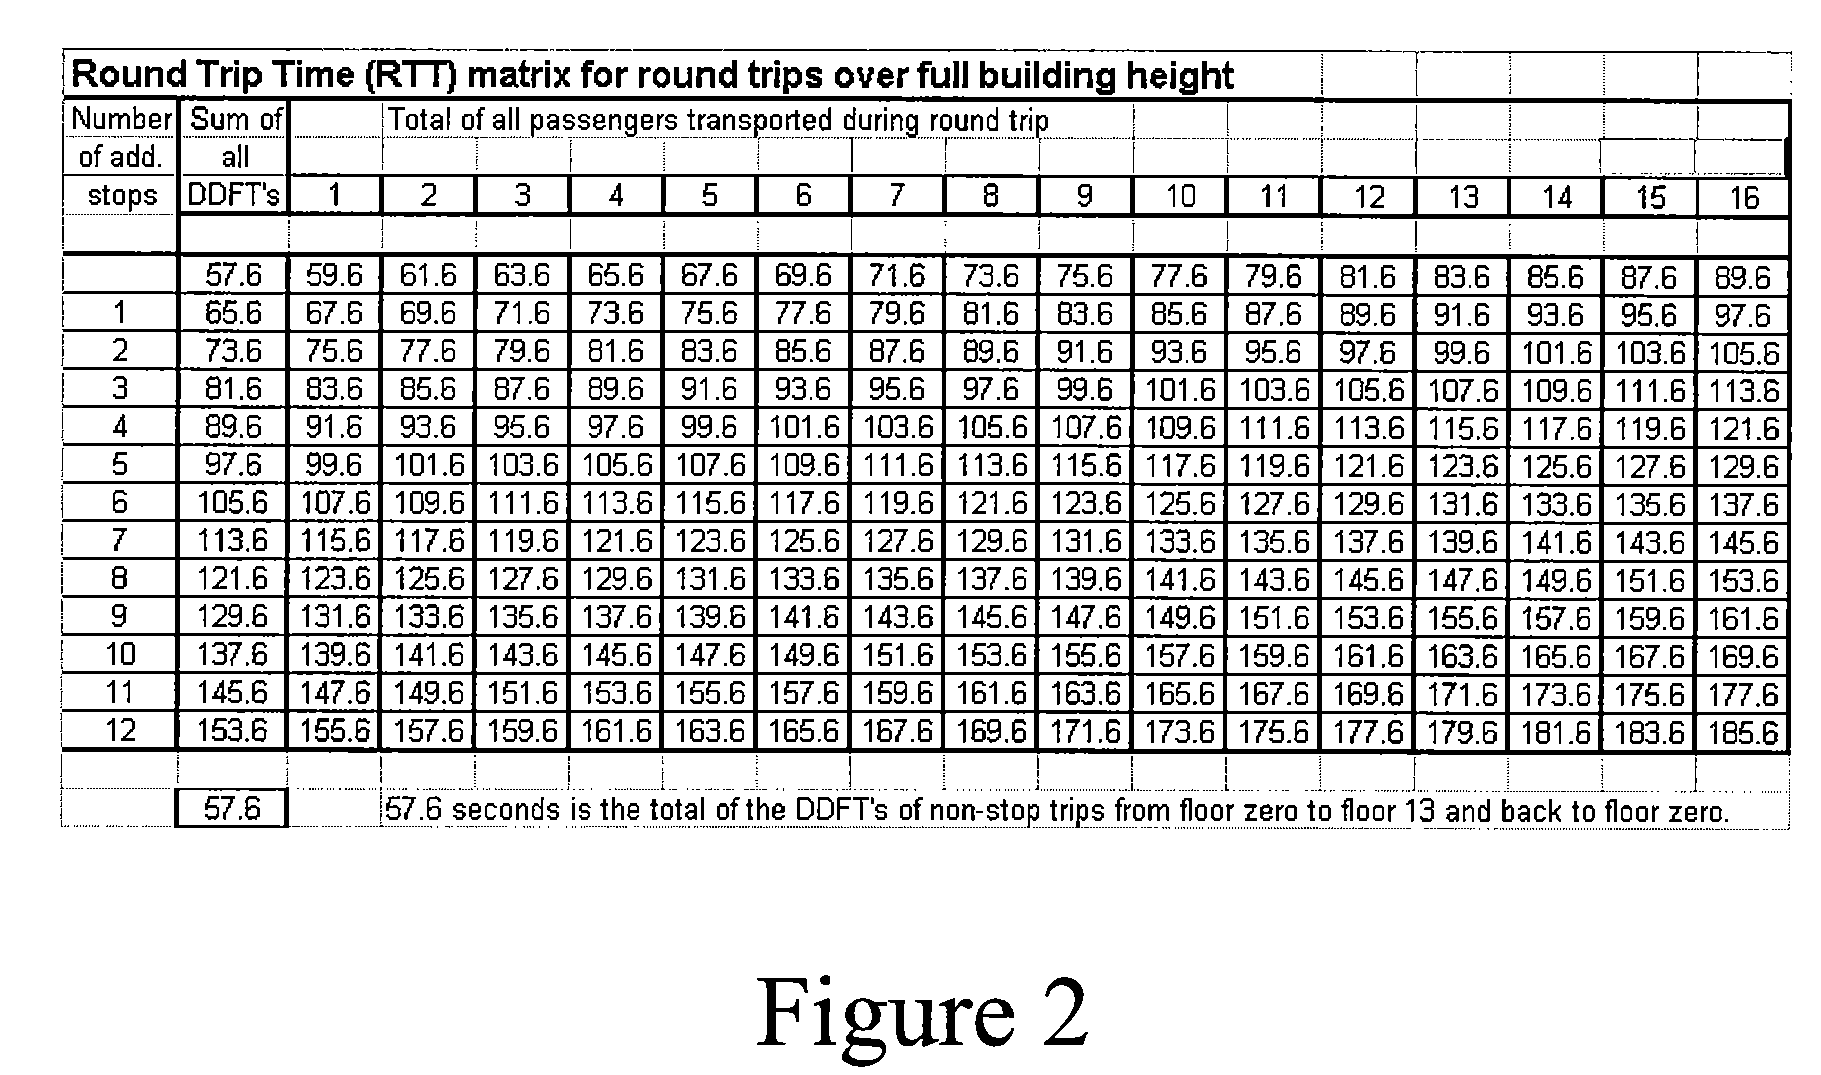 Method of controlling intelligent destination elevators with selected operation modes